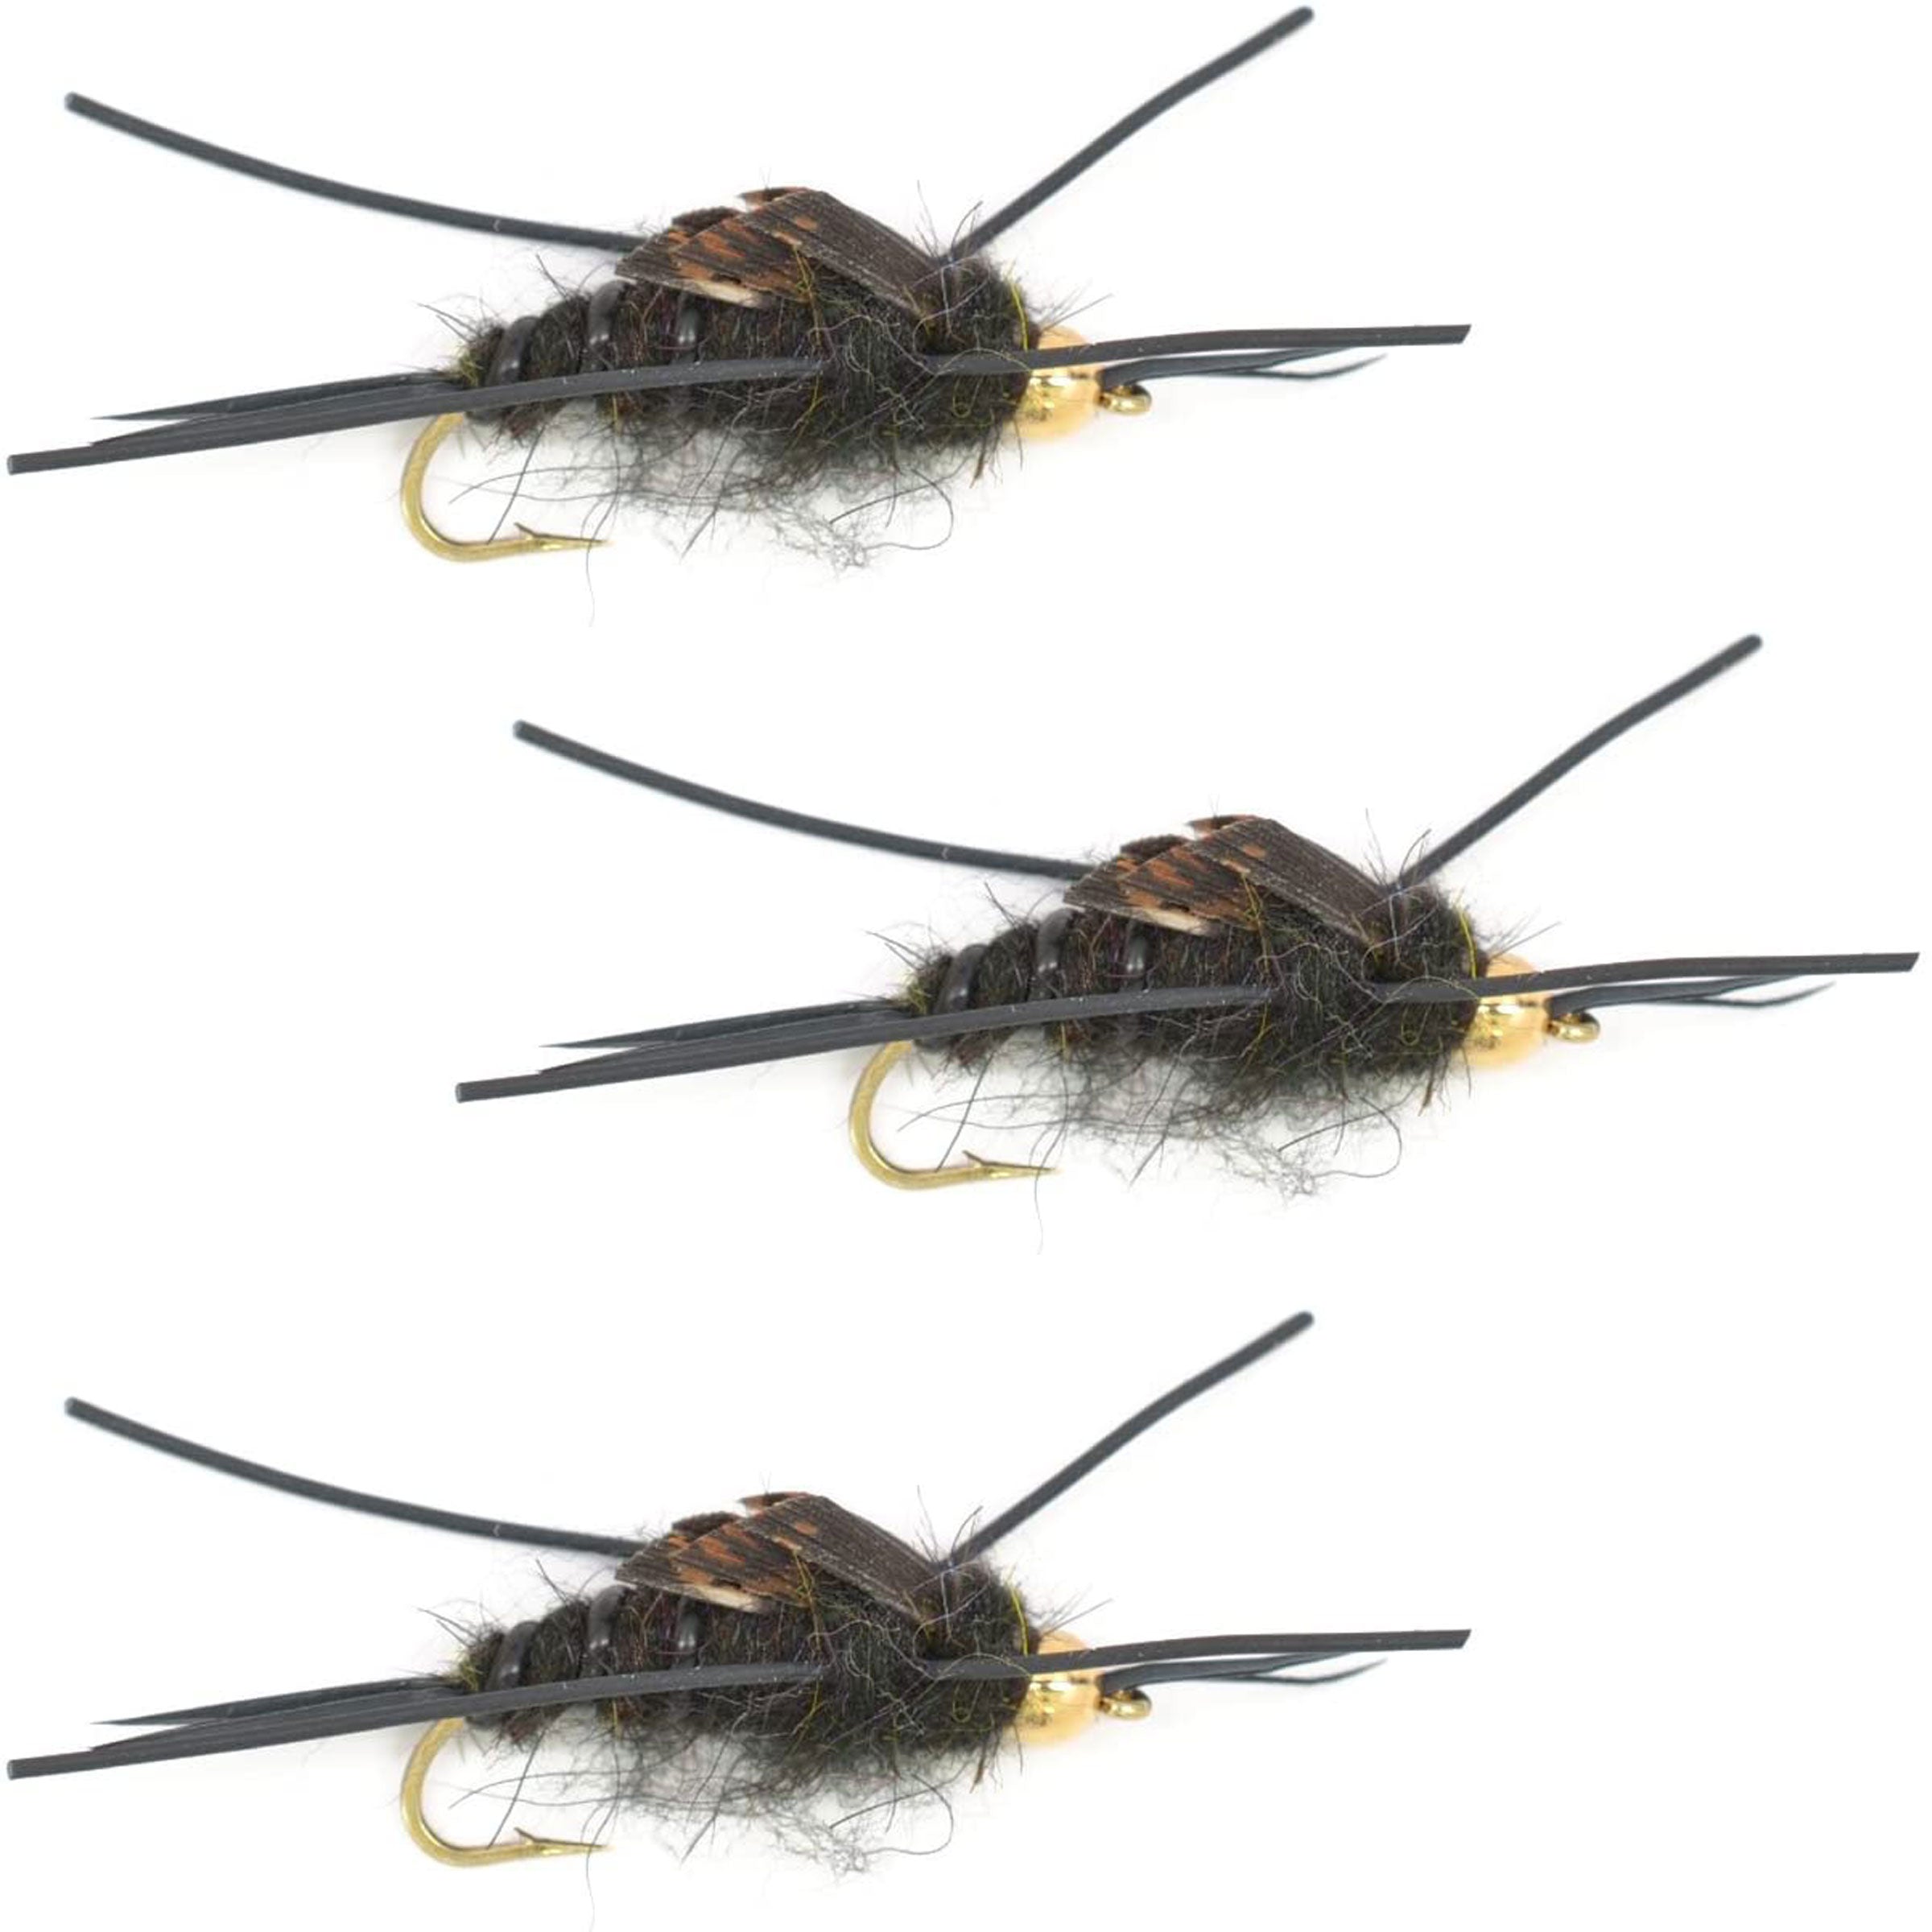 3 Pack Gold Bead Kaufmann's Black Stone Fly with Rubber Legs - Stonefly Wet Fly - Hook Size 6